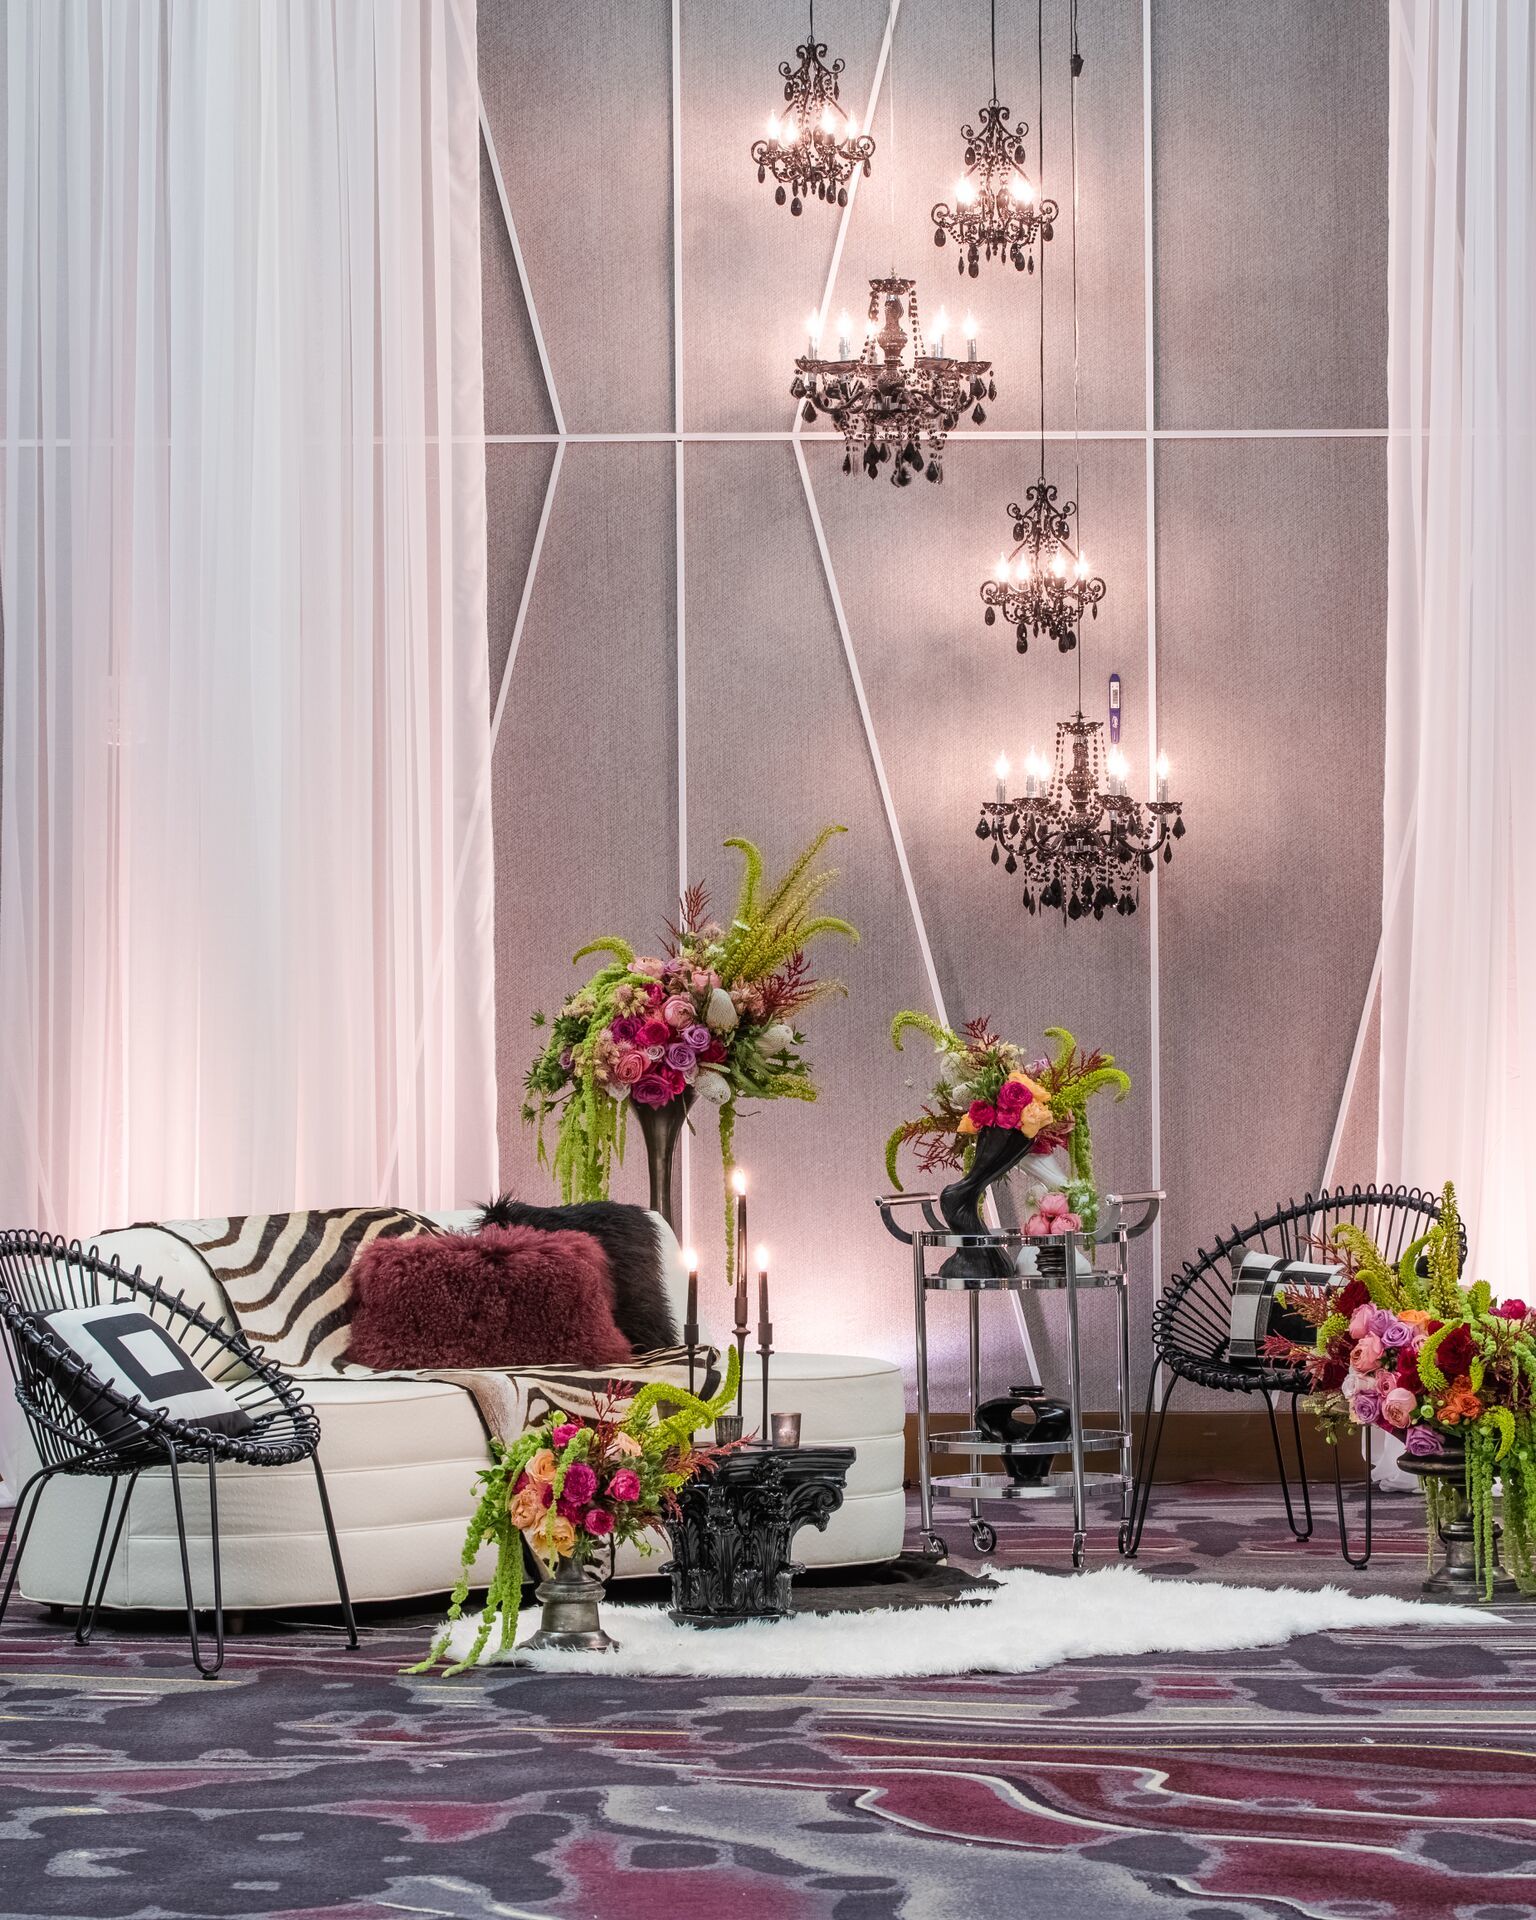 So Staged, along with wedding planner Choreographed Events, set up black and white furniture to make the colored florals pop. Photo courtesy of Dylan Jon Wade Cox Photography.